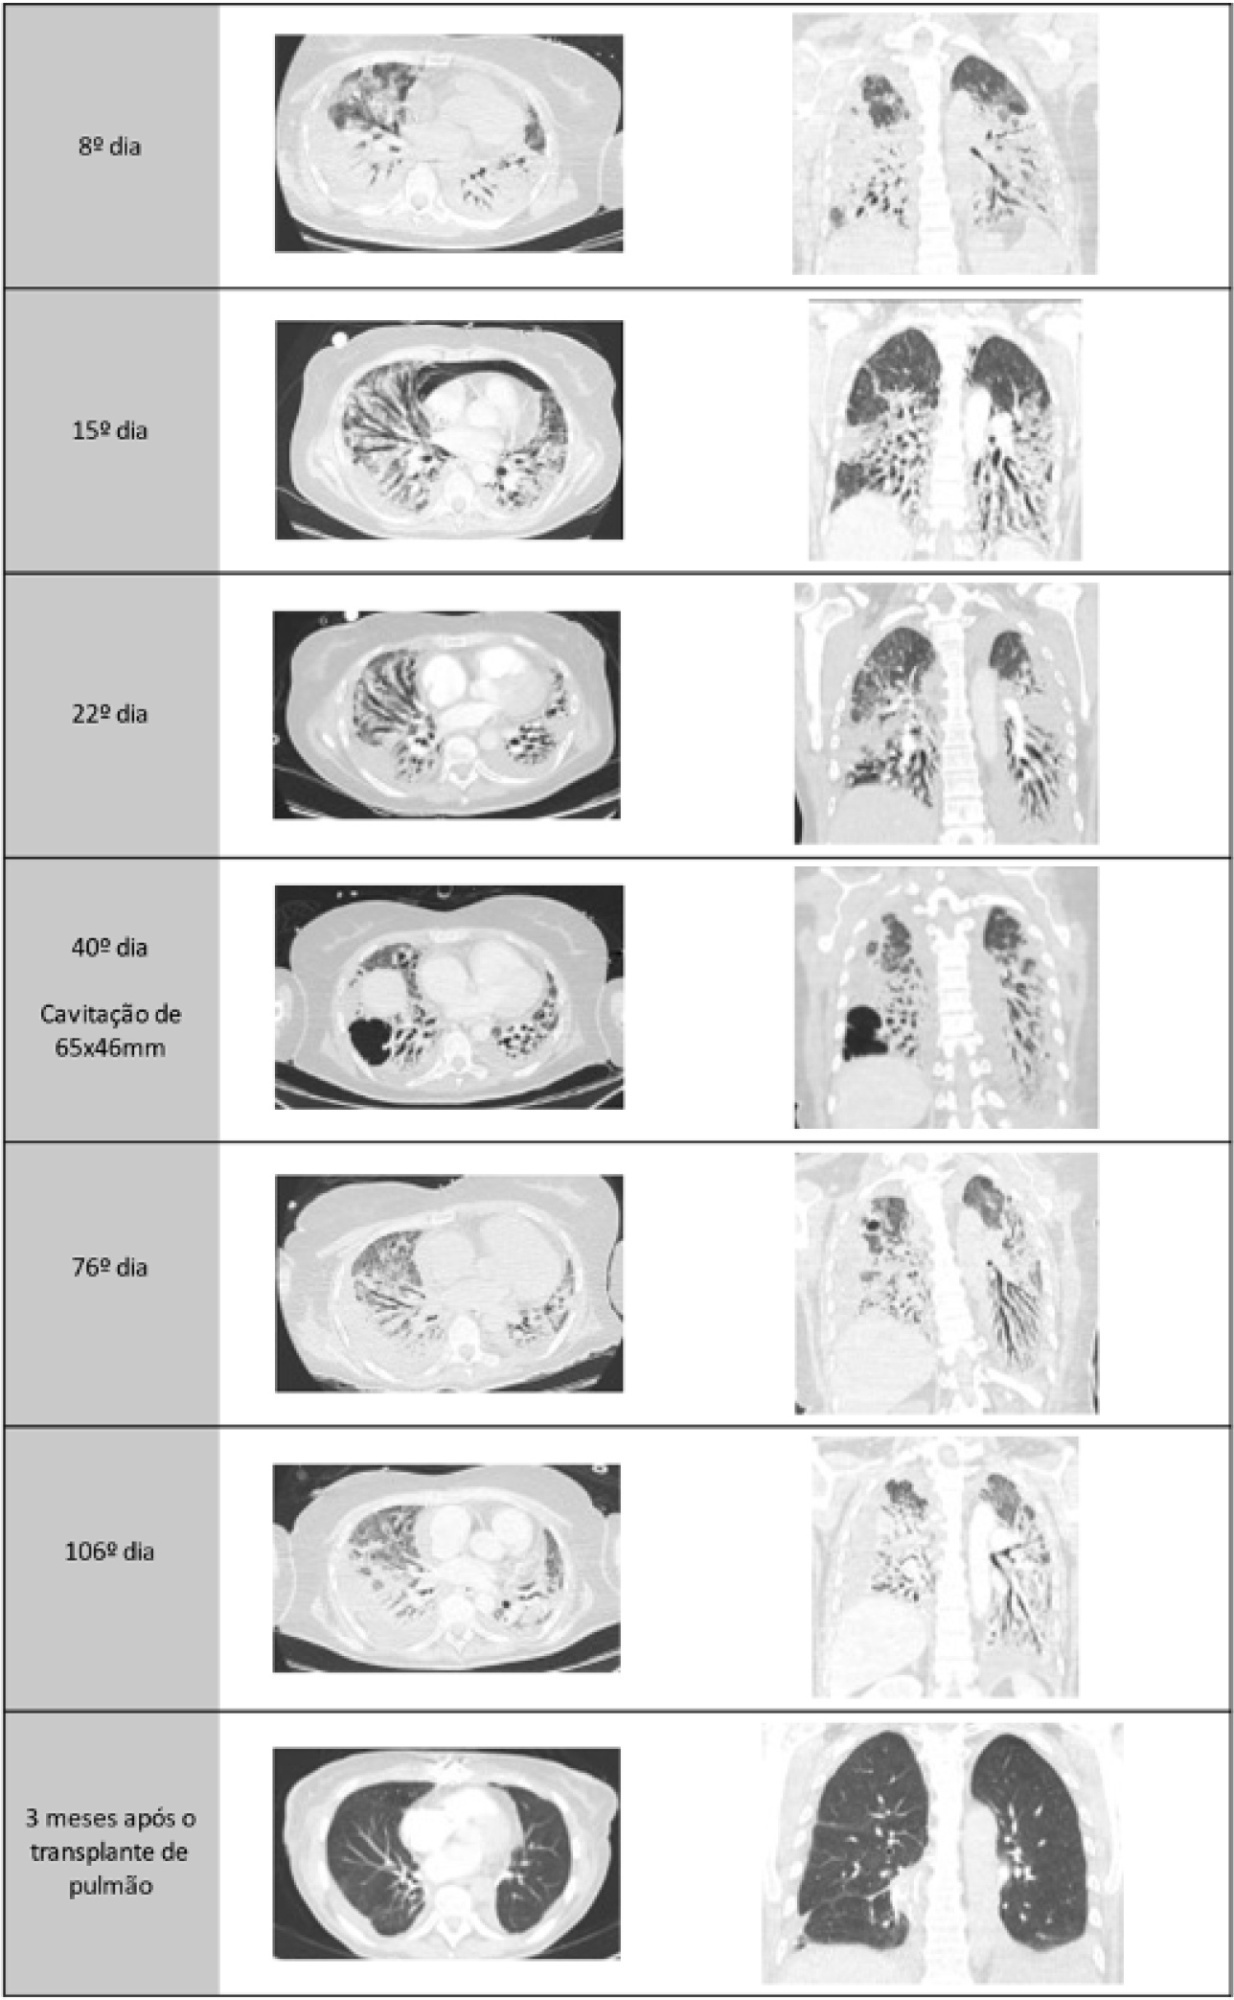 Long-term extracorporeal membrane oxygenation – from SARS-CoV-2 infection to lung transplantation